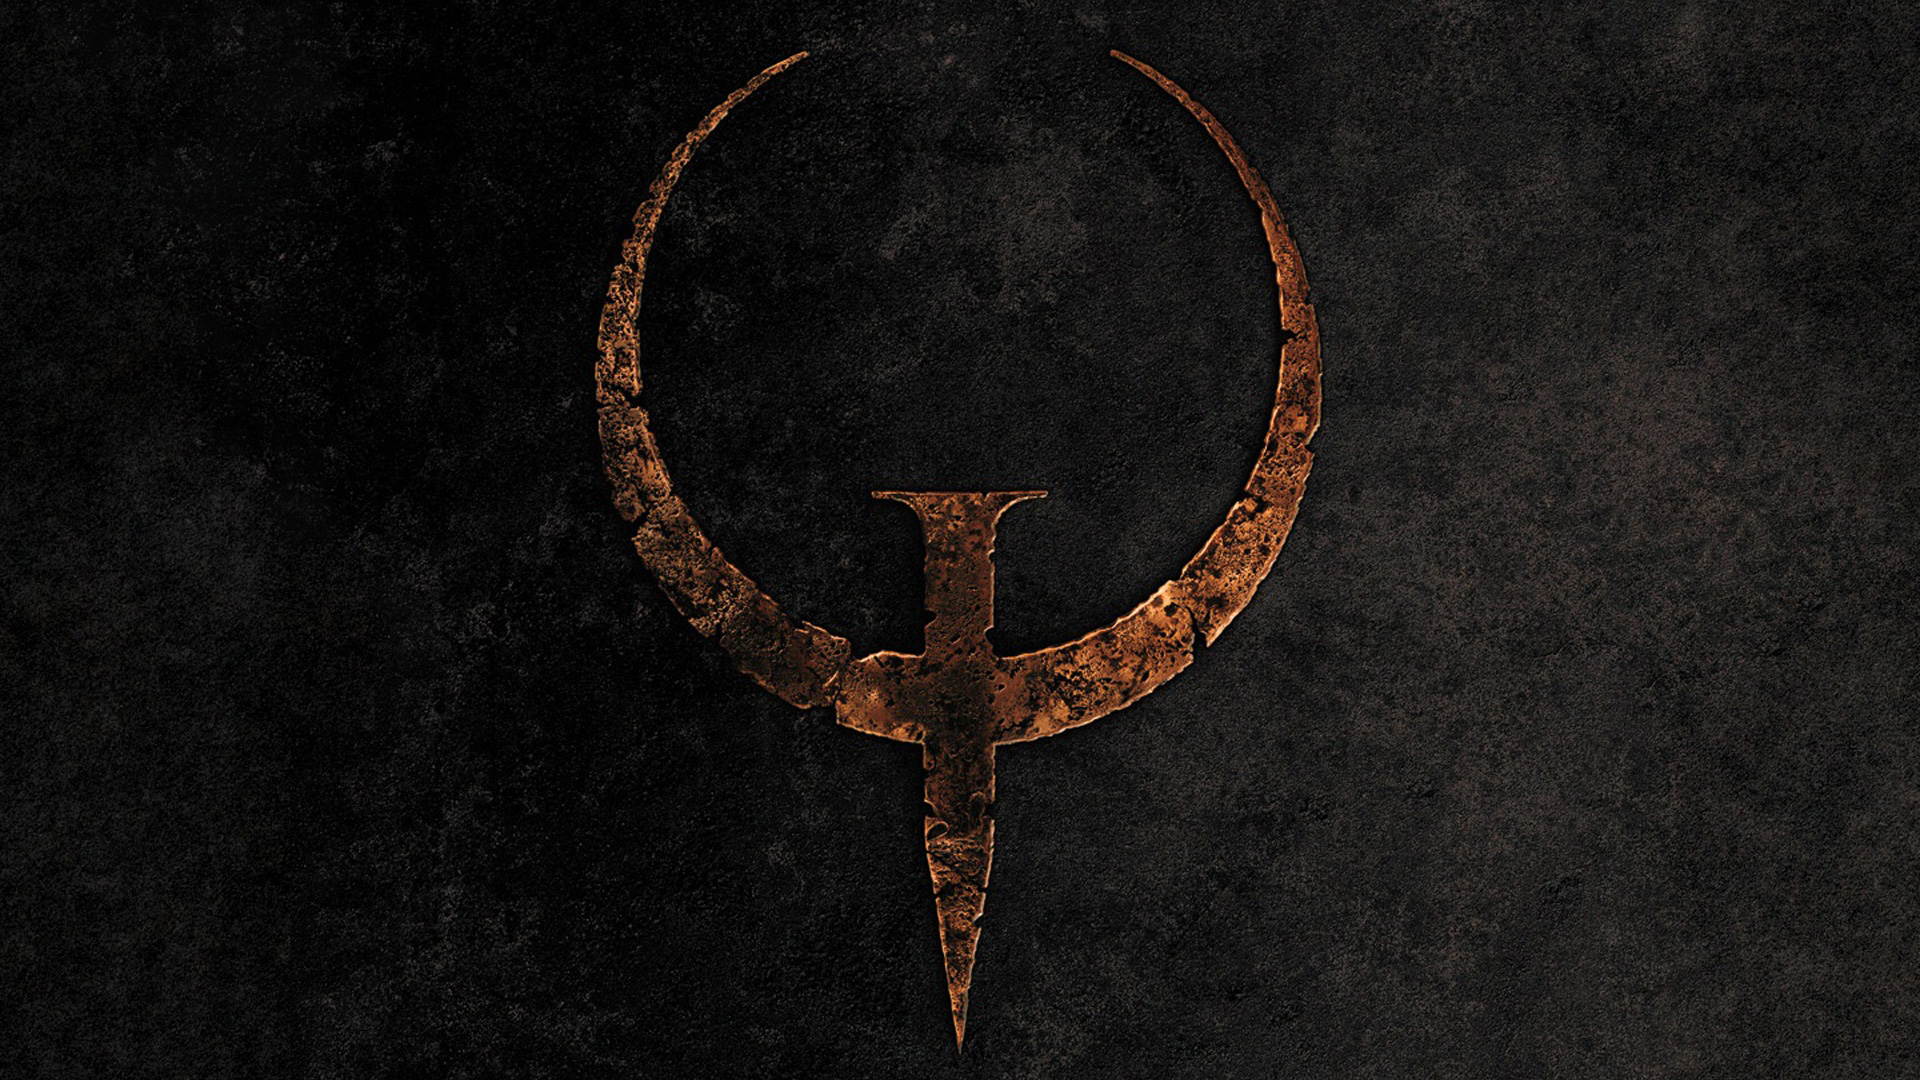 Quake co-op during QuakeCon weekend August 19-21